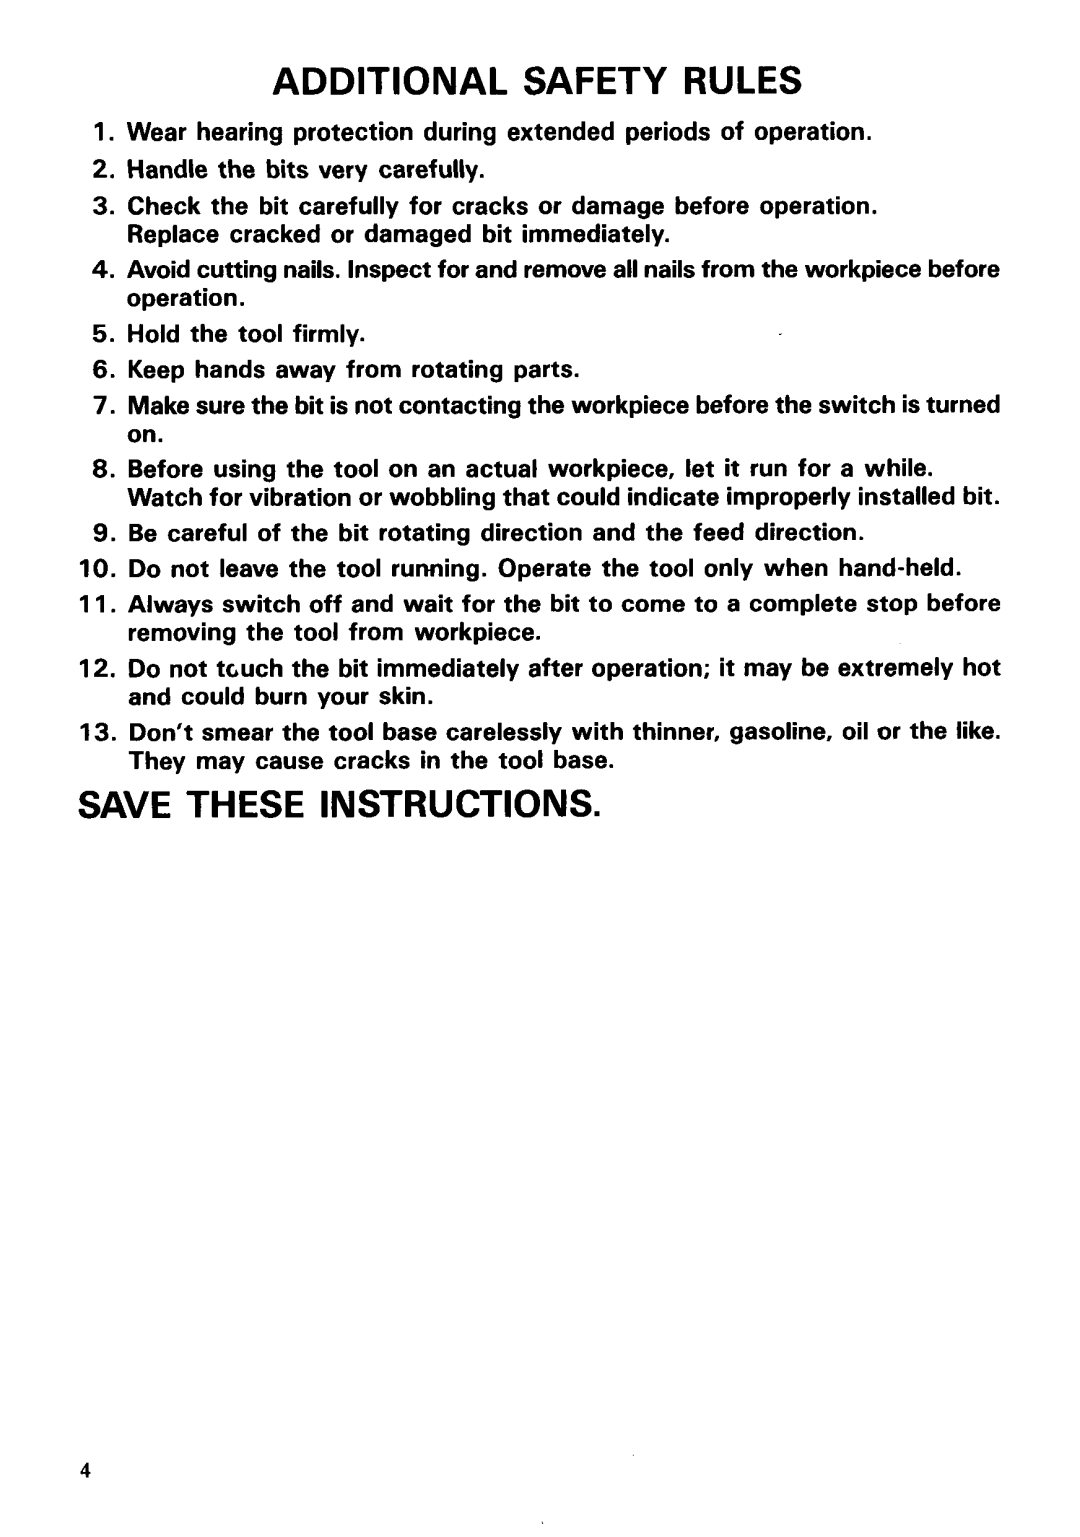 Makita 3703 instruction manual Additional Safety Rules, Save These Instructions 